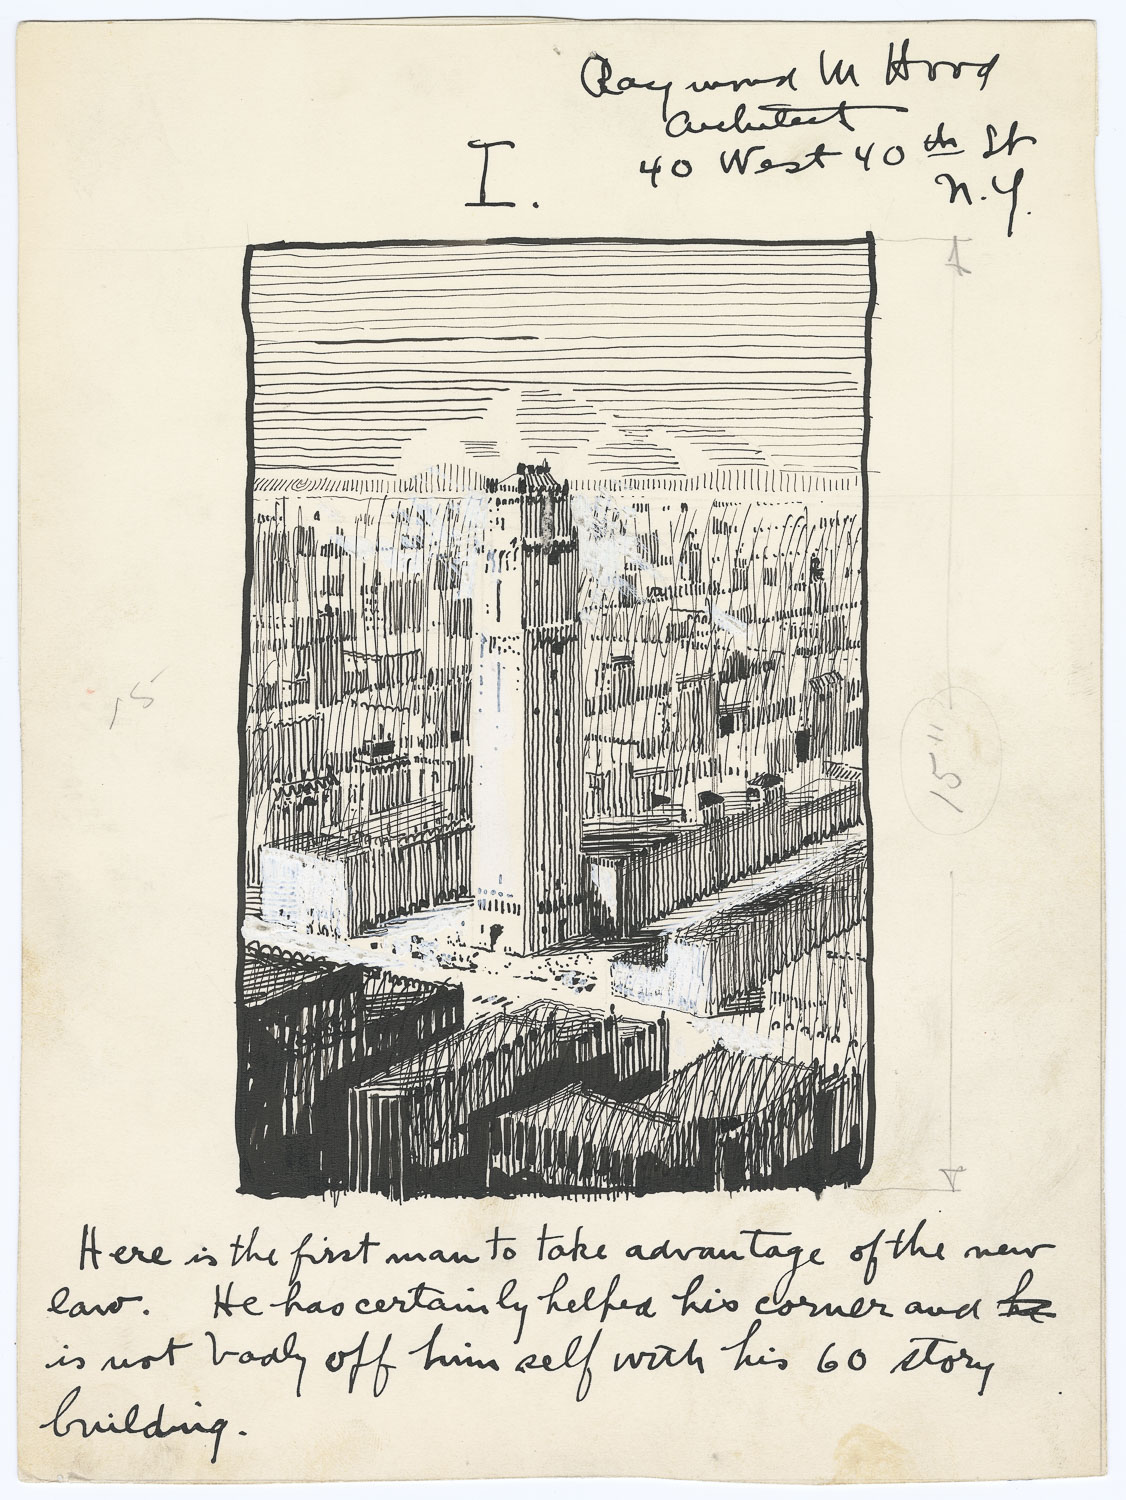 A line drawing of a lone tall skyscraper surrounded by low buildings. The skyscraper is located on the short end of a long rectangular city block. It is set back from the sidewalk on three sides, providing an open plaza. The sketch is rough and does not provide much detail about the skyscraper other than its overall shape, which is tall, narrow, and vertical lines that rise up more or less uninterrupted. An inscription below the drawing reads: "Here is the first man to take advantage of the new law. He has certainly helped his corner and is not badly off himself with his 60 story building."